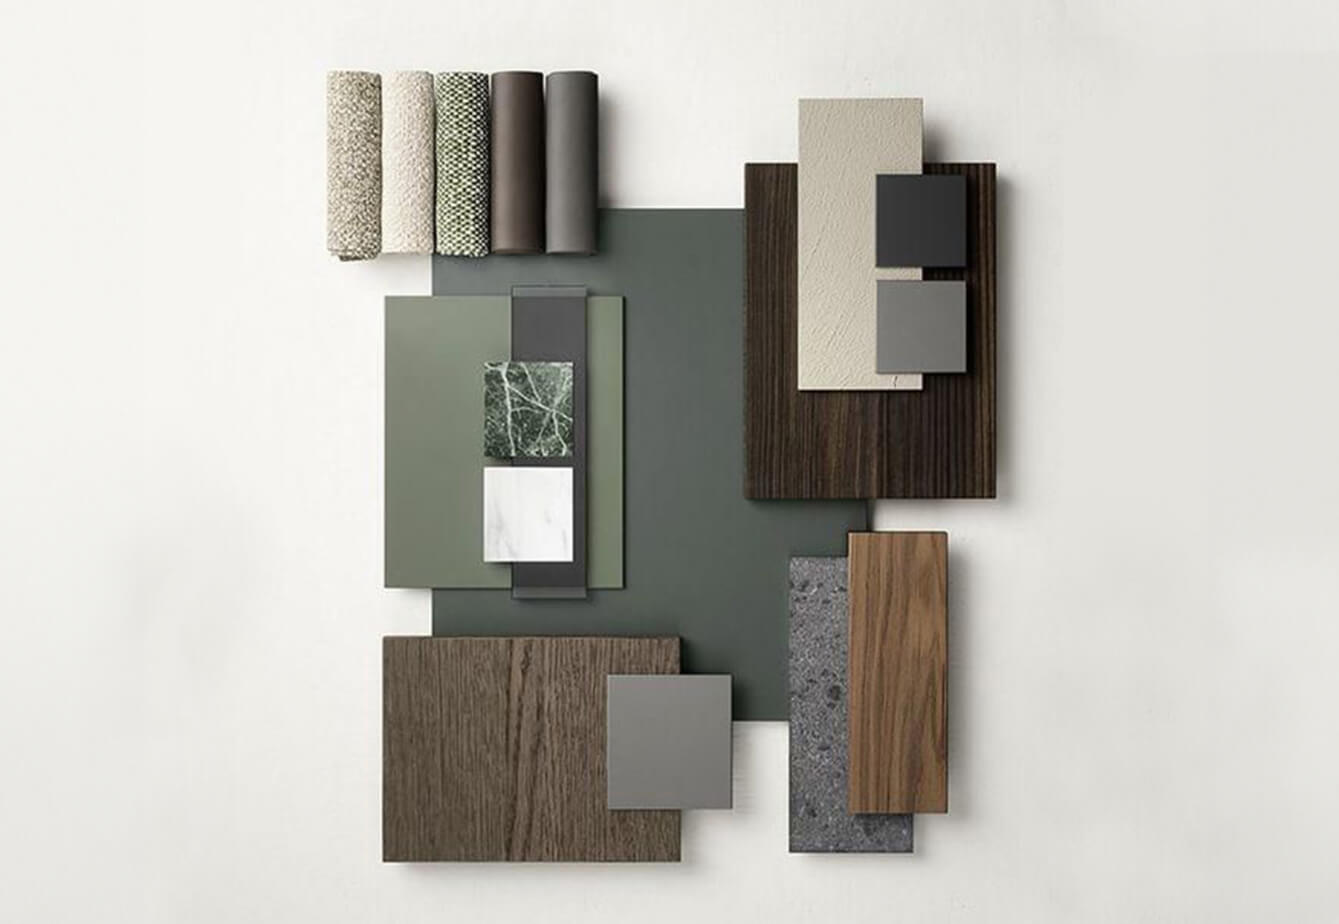 Duco colour samples and options for finishing